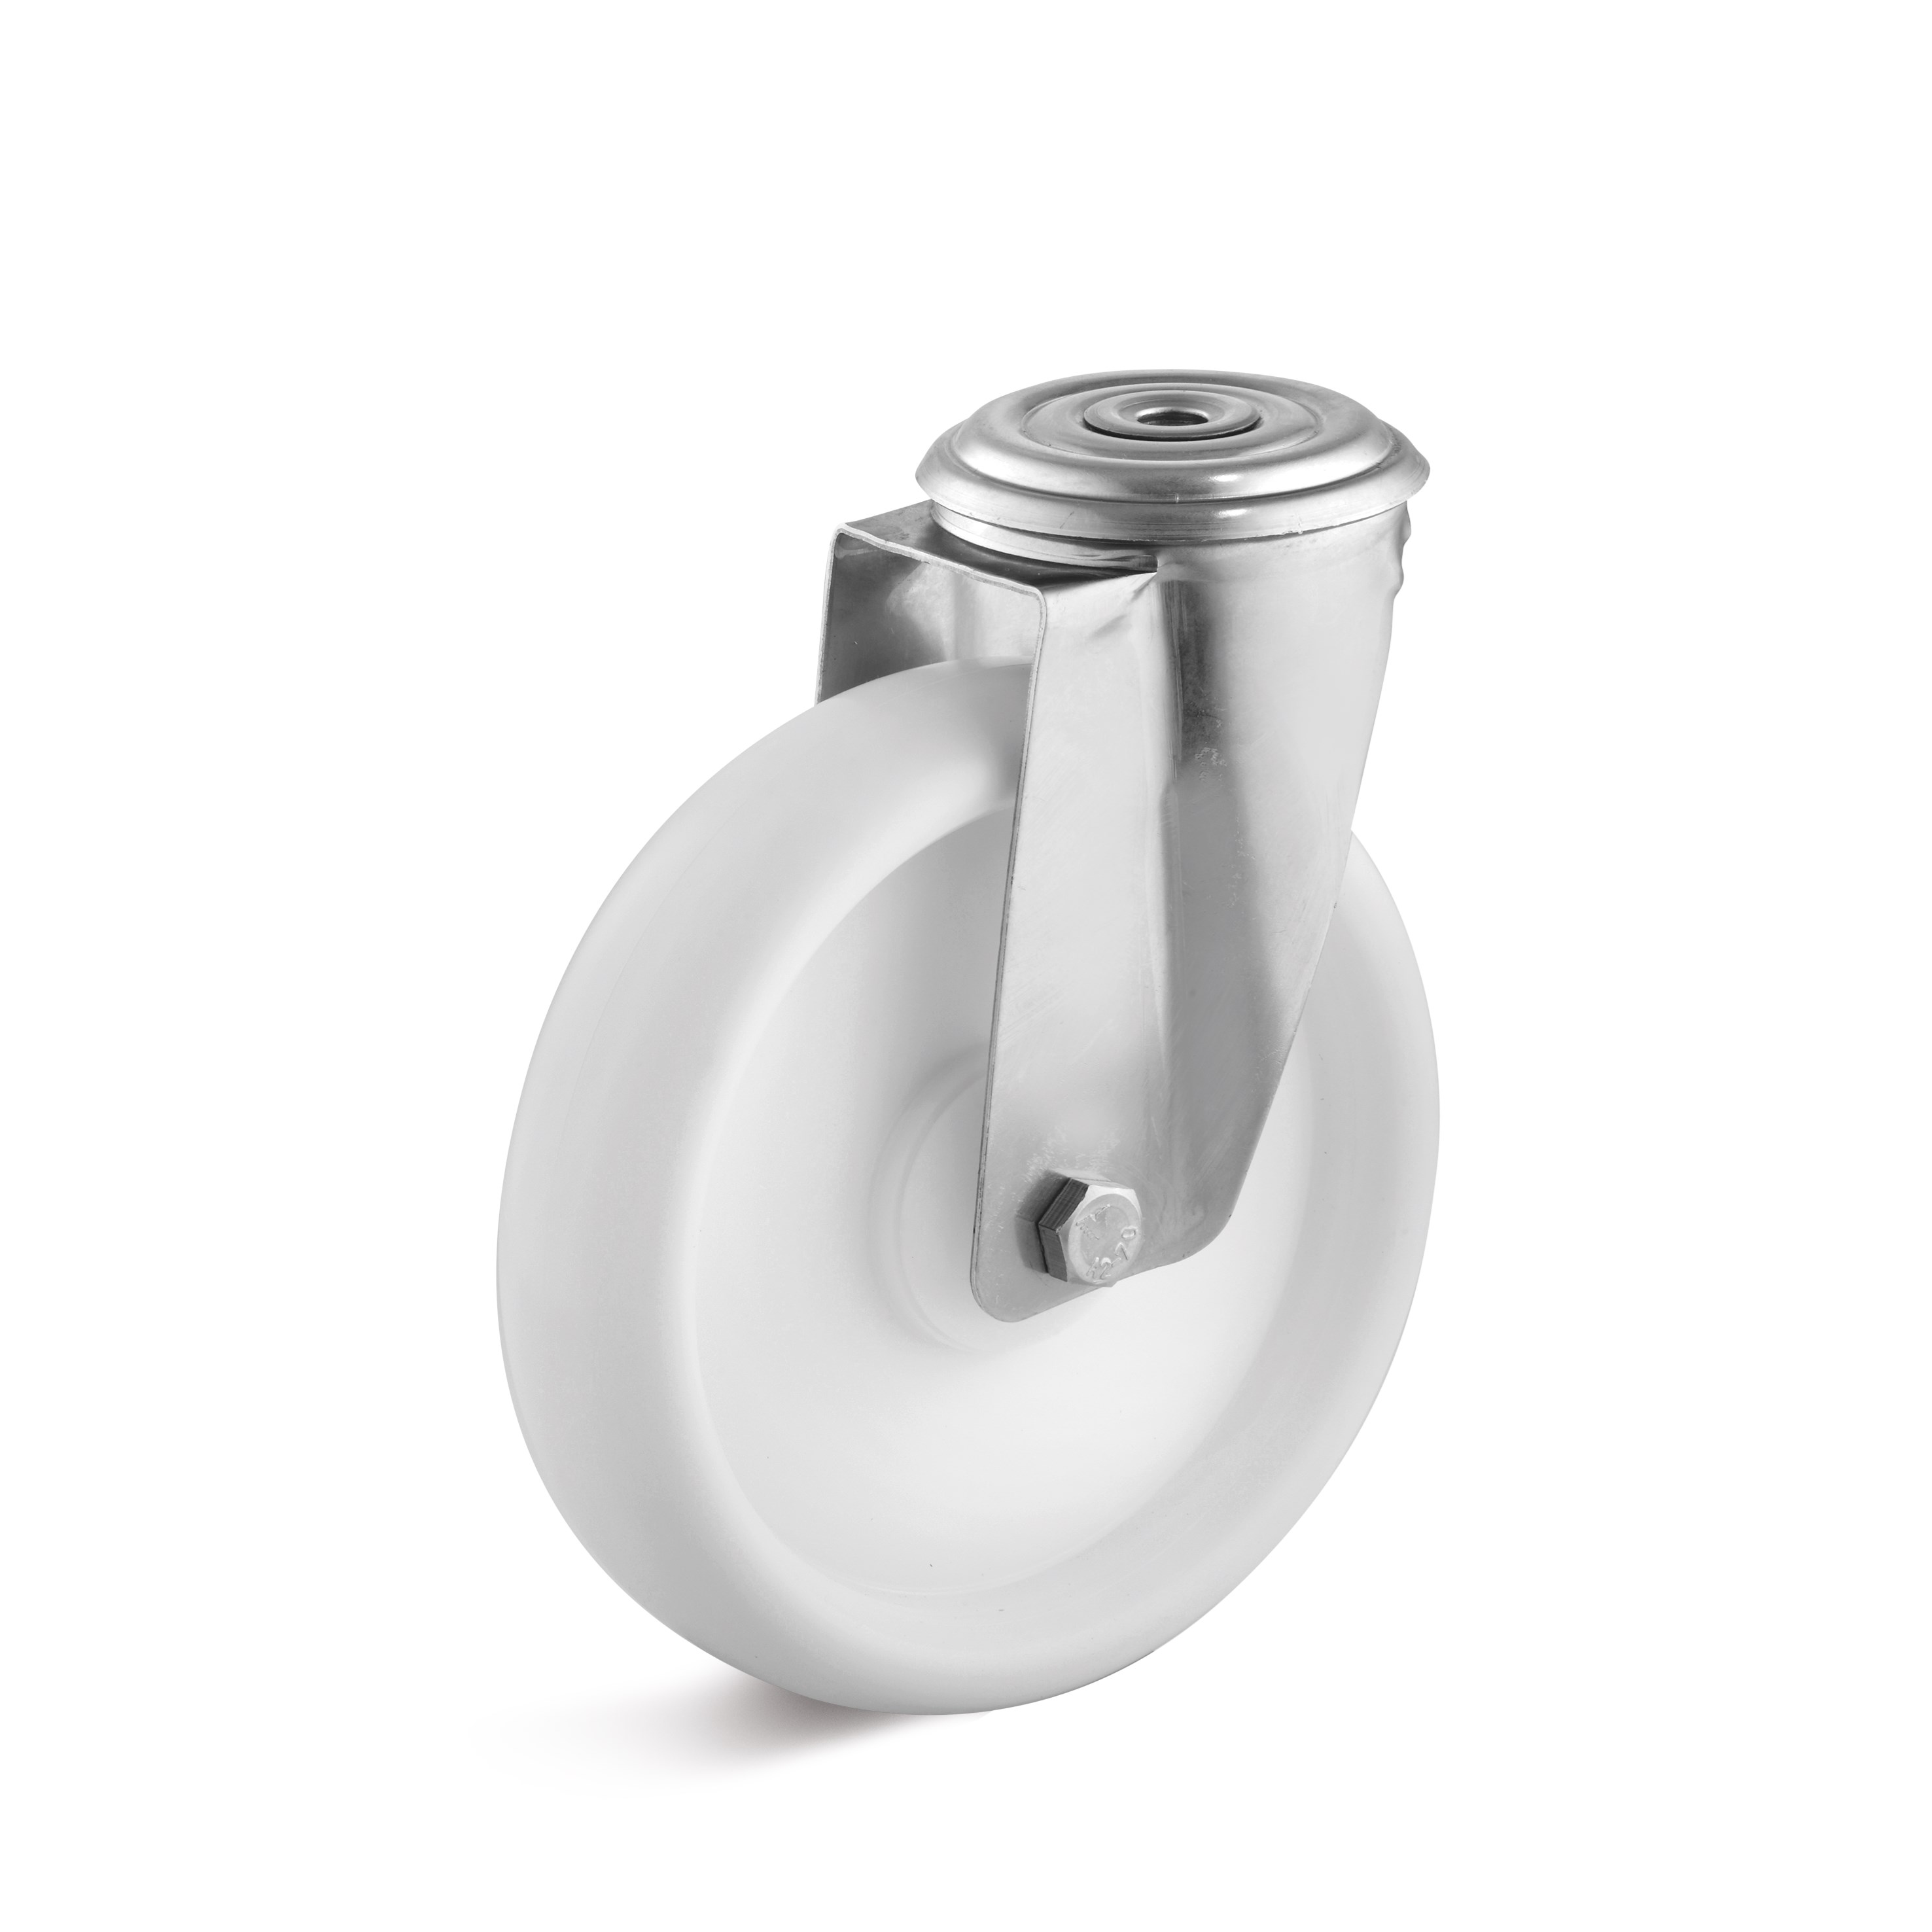 Stainless steel swivel castor with back hole and polypropylene wheel